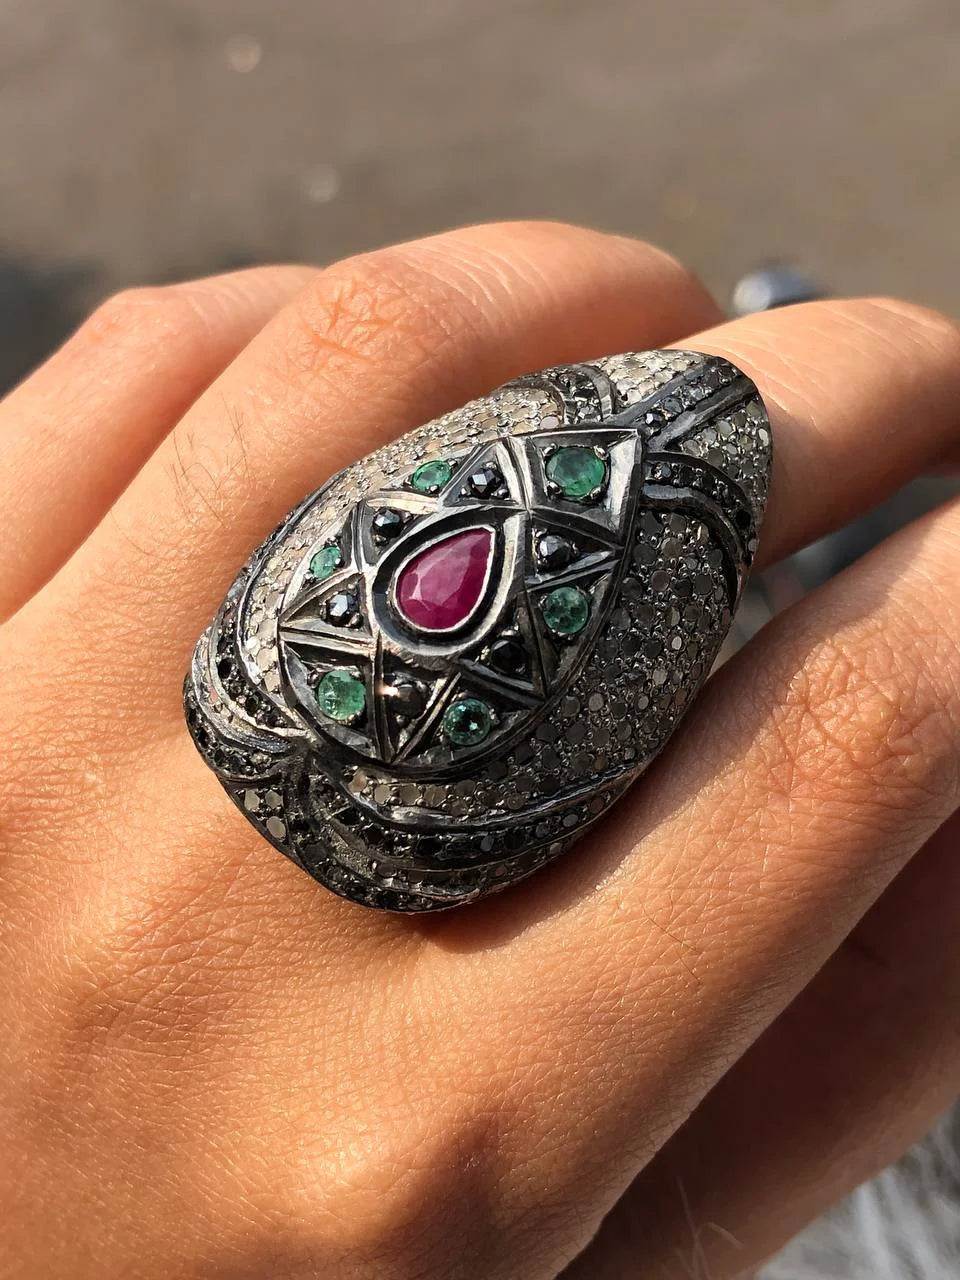 Vintage-Inspired 925 Sterling Silver Antique Ring with Gemstone - Elegant Jewelry for Special Occasions